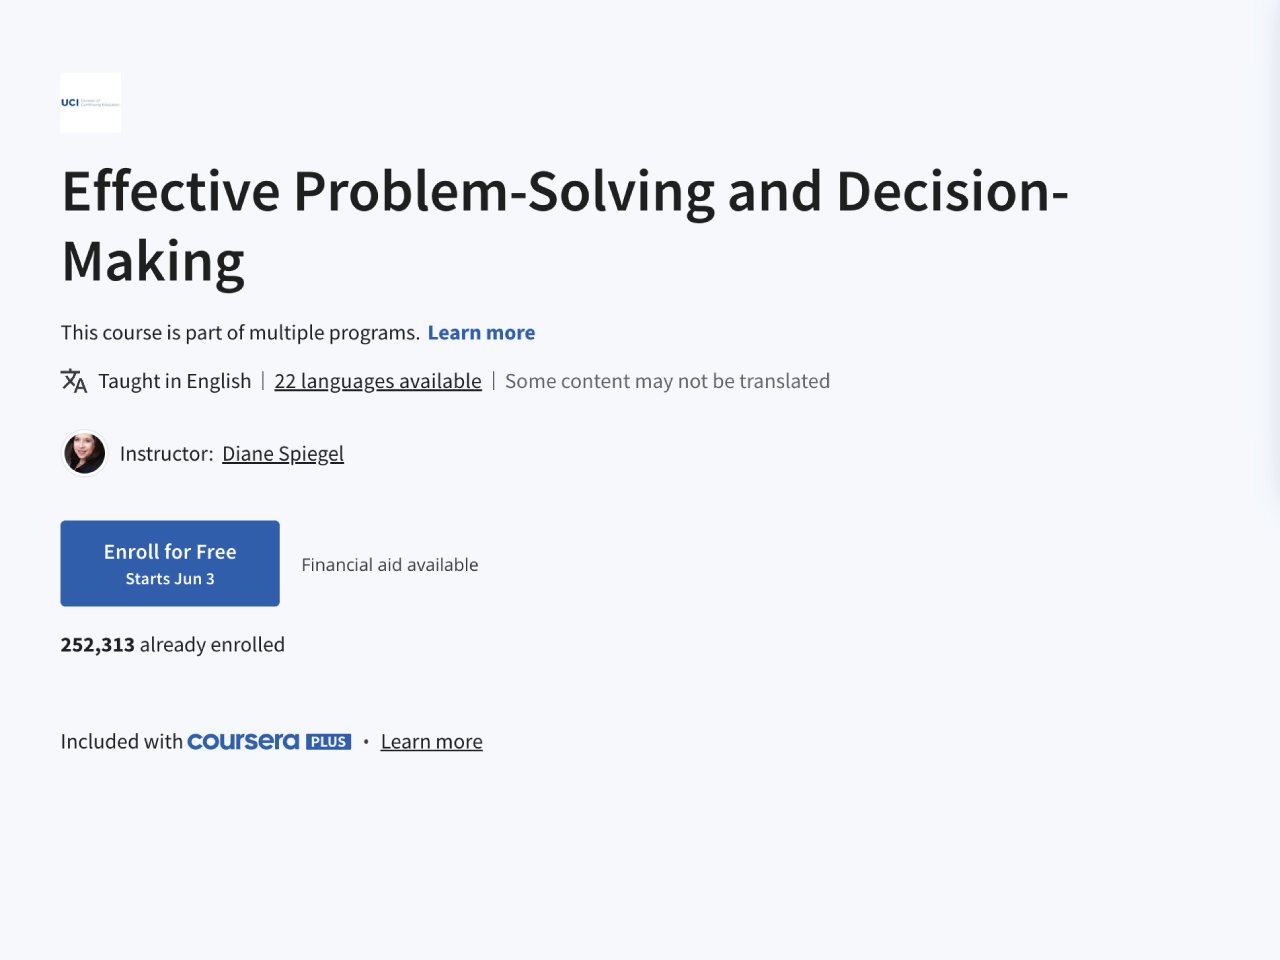 Effective Problem-Solving and Decision-Making